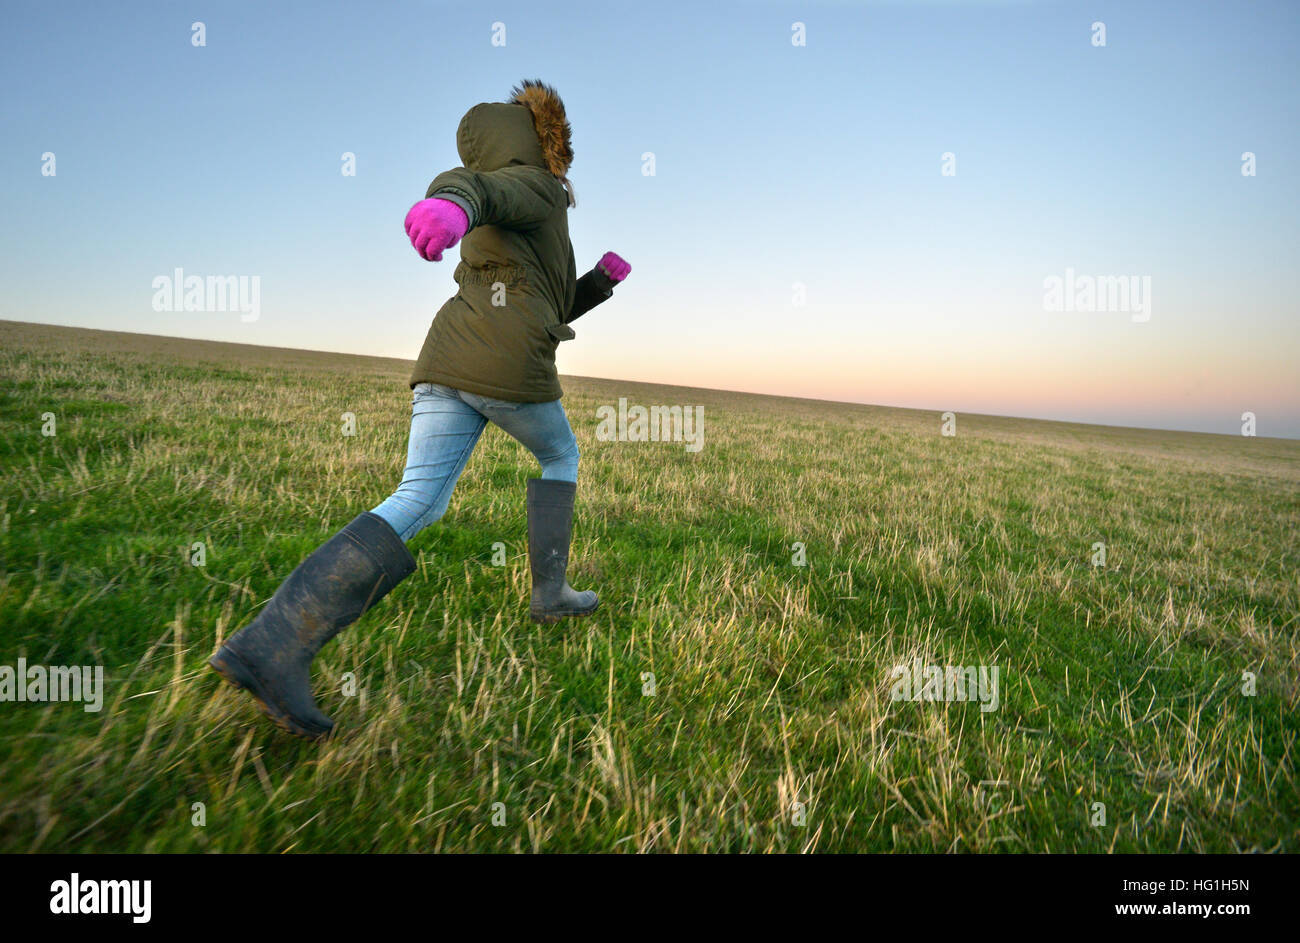 Child in welly boots running on a grassy hill Stock Photo